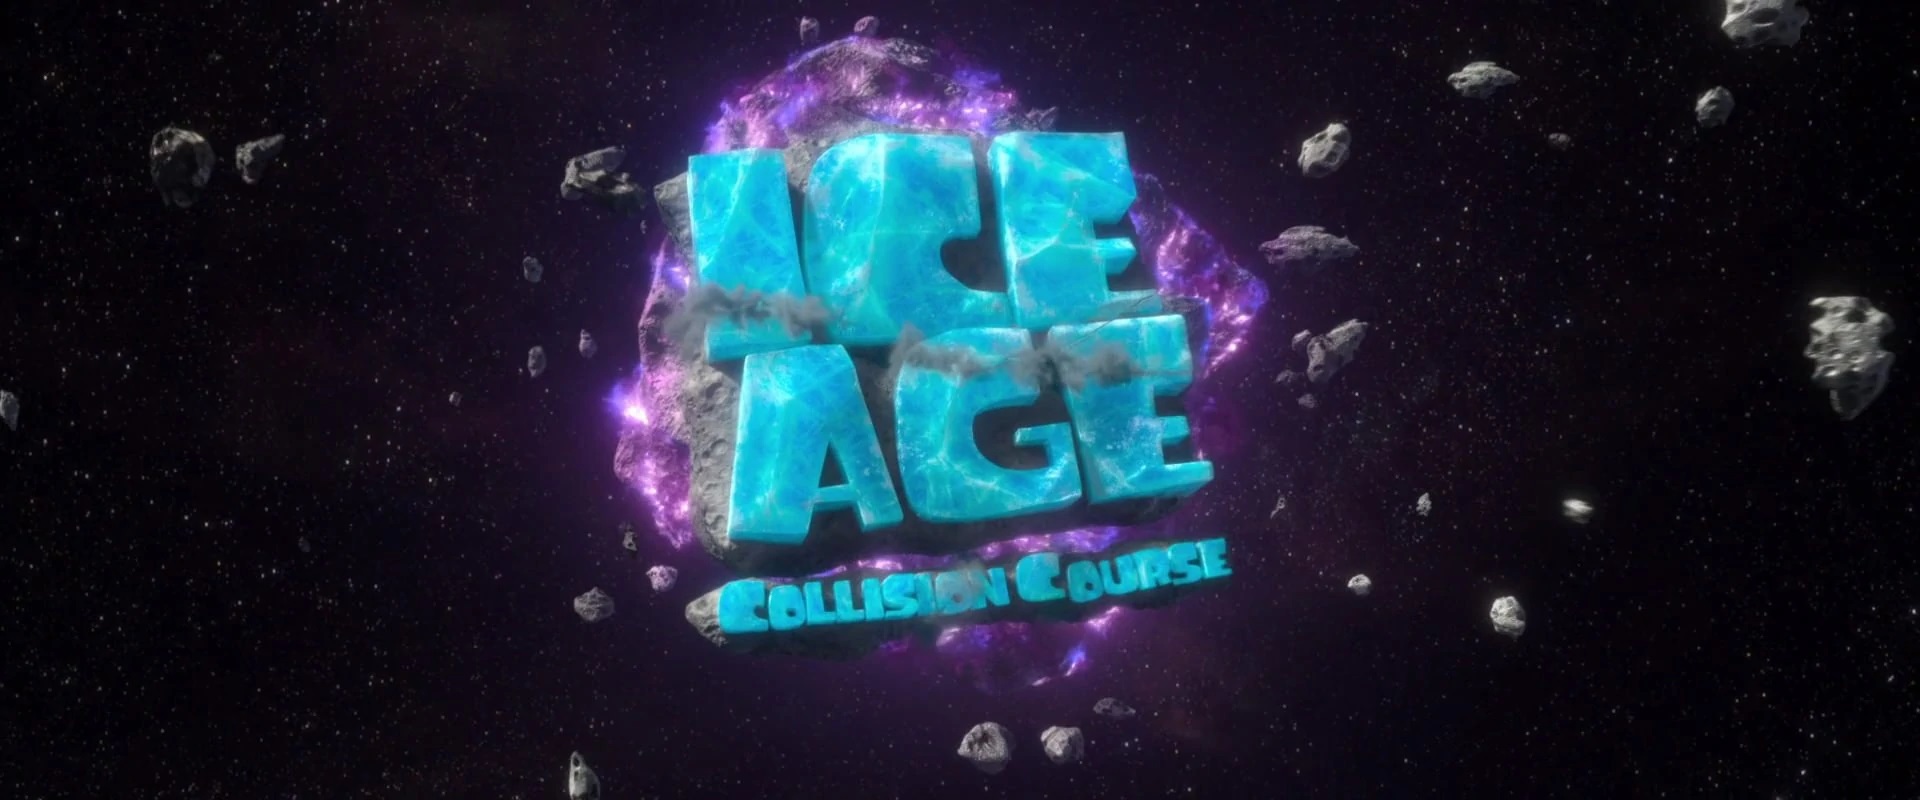 watch ice age collision course online free putlockers